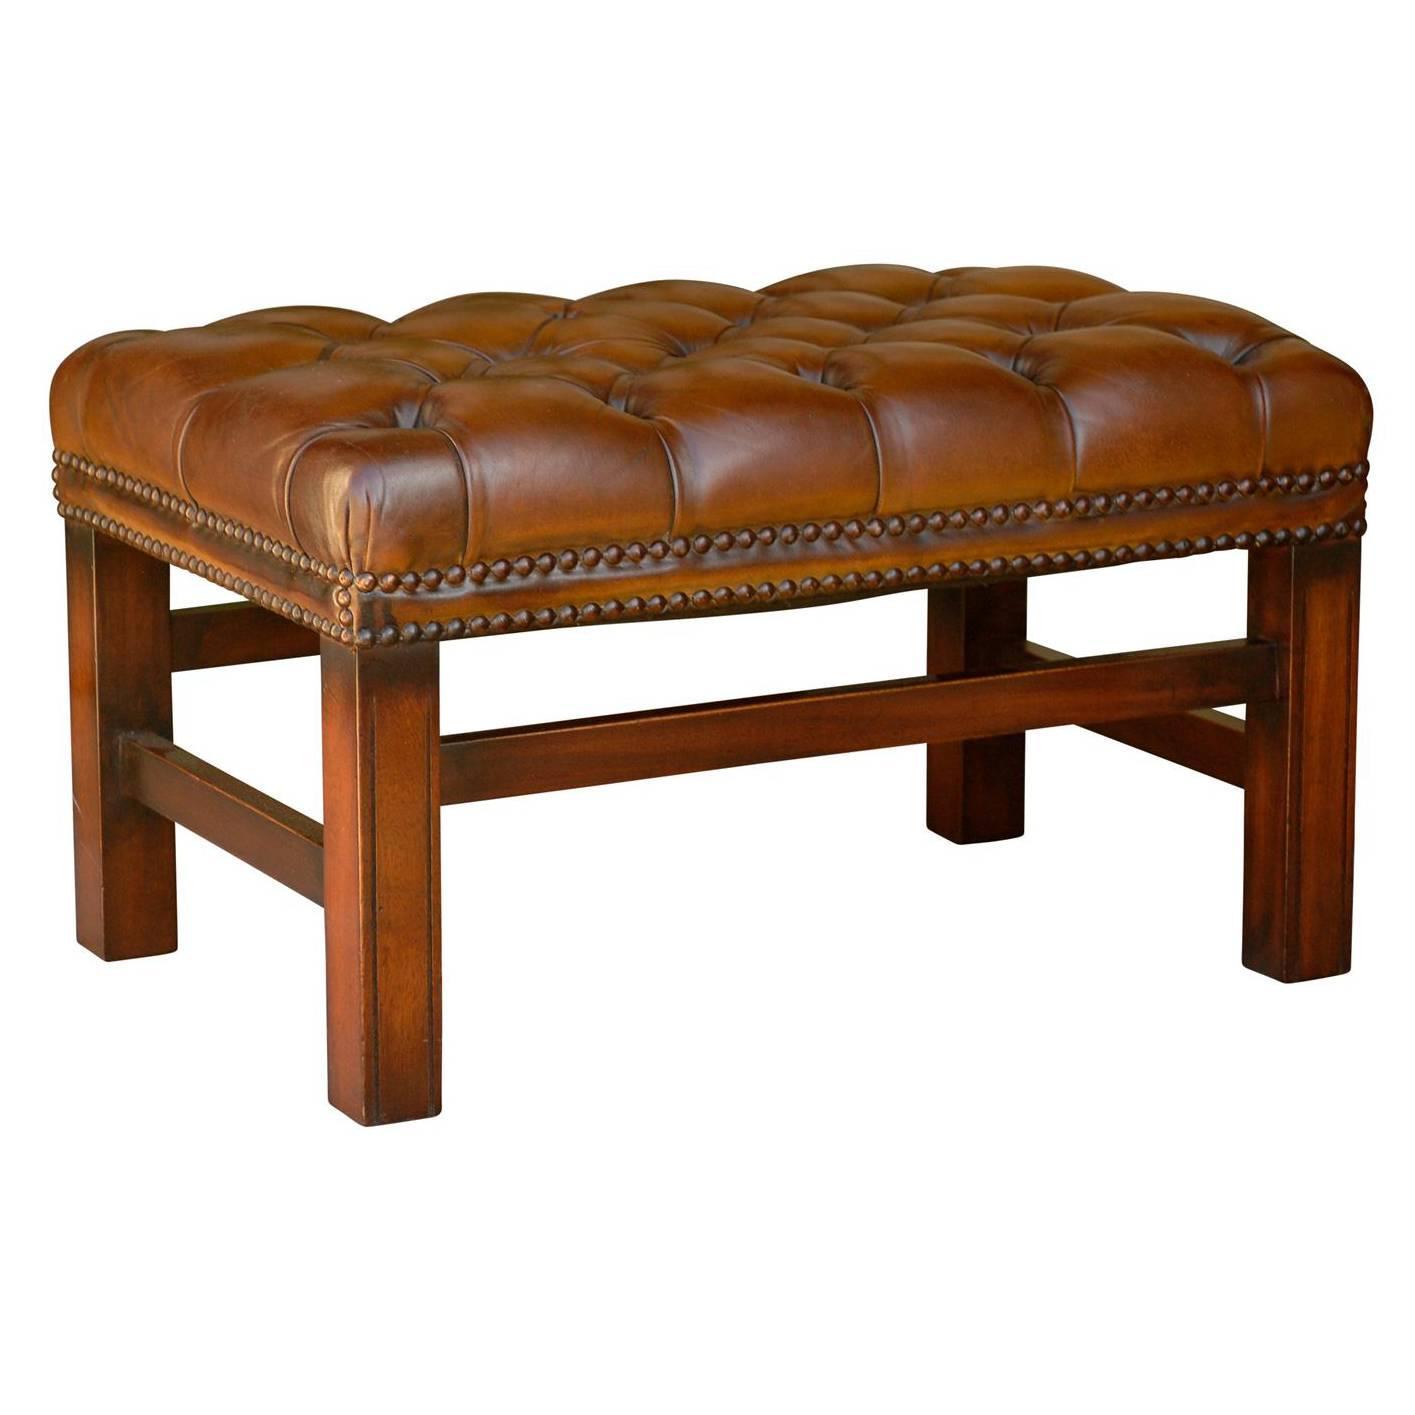 Brown Tufted Leather Seat, Brown Leather Bench Seat